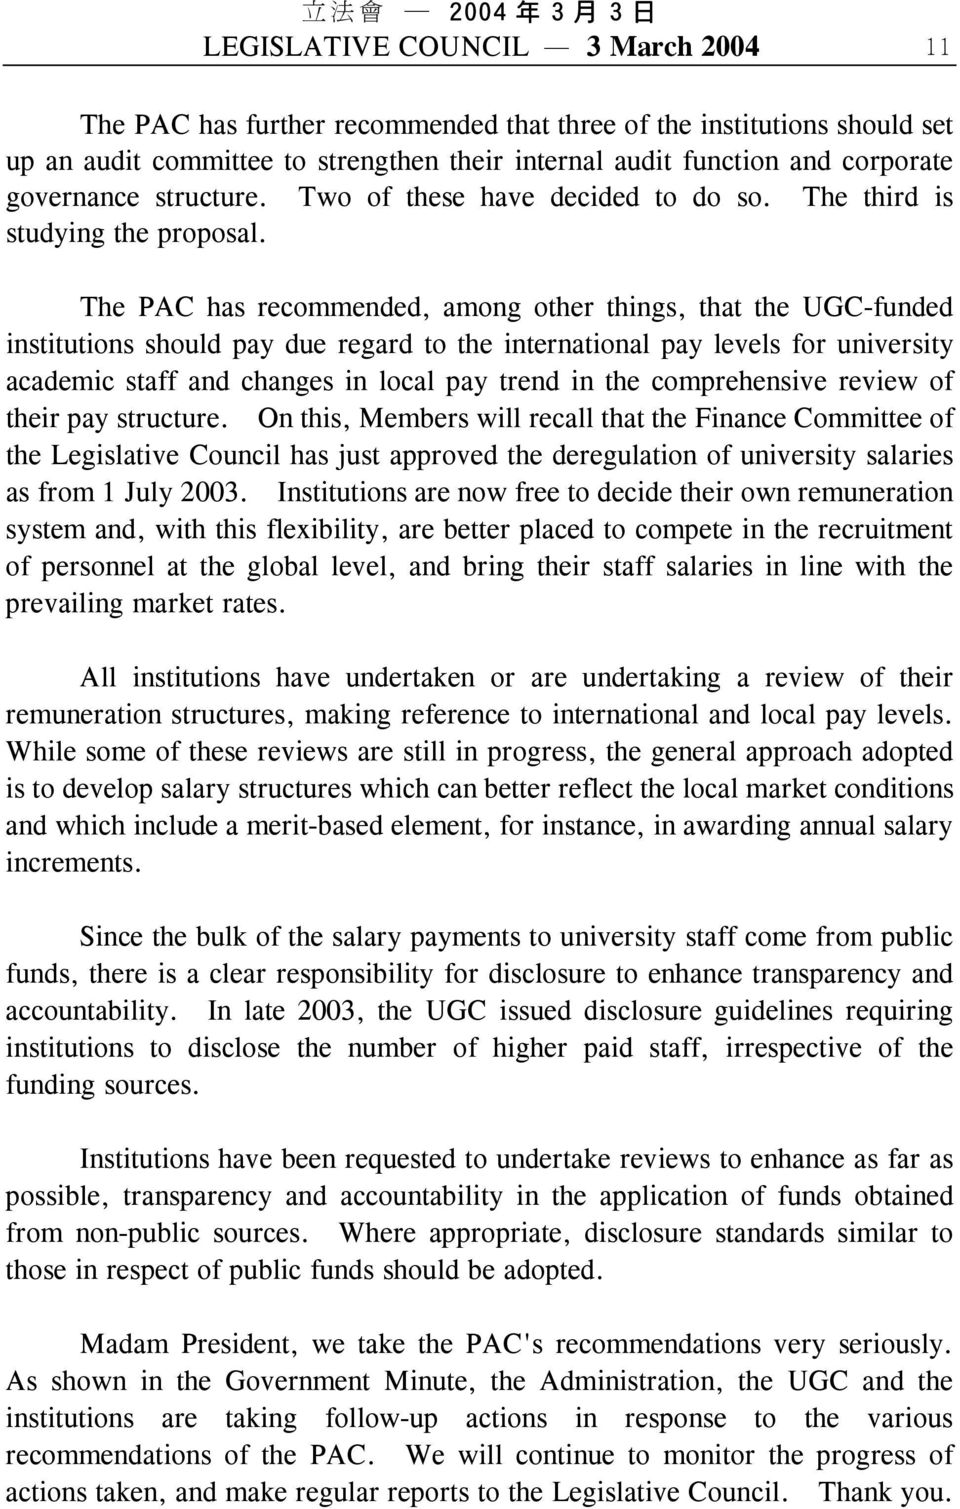 The PAC has recommended, among other things, that the UGC-funded institutions should pay due regard to the international pay levels for university academic staff and changes in local pay trend in the